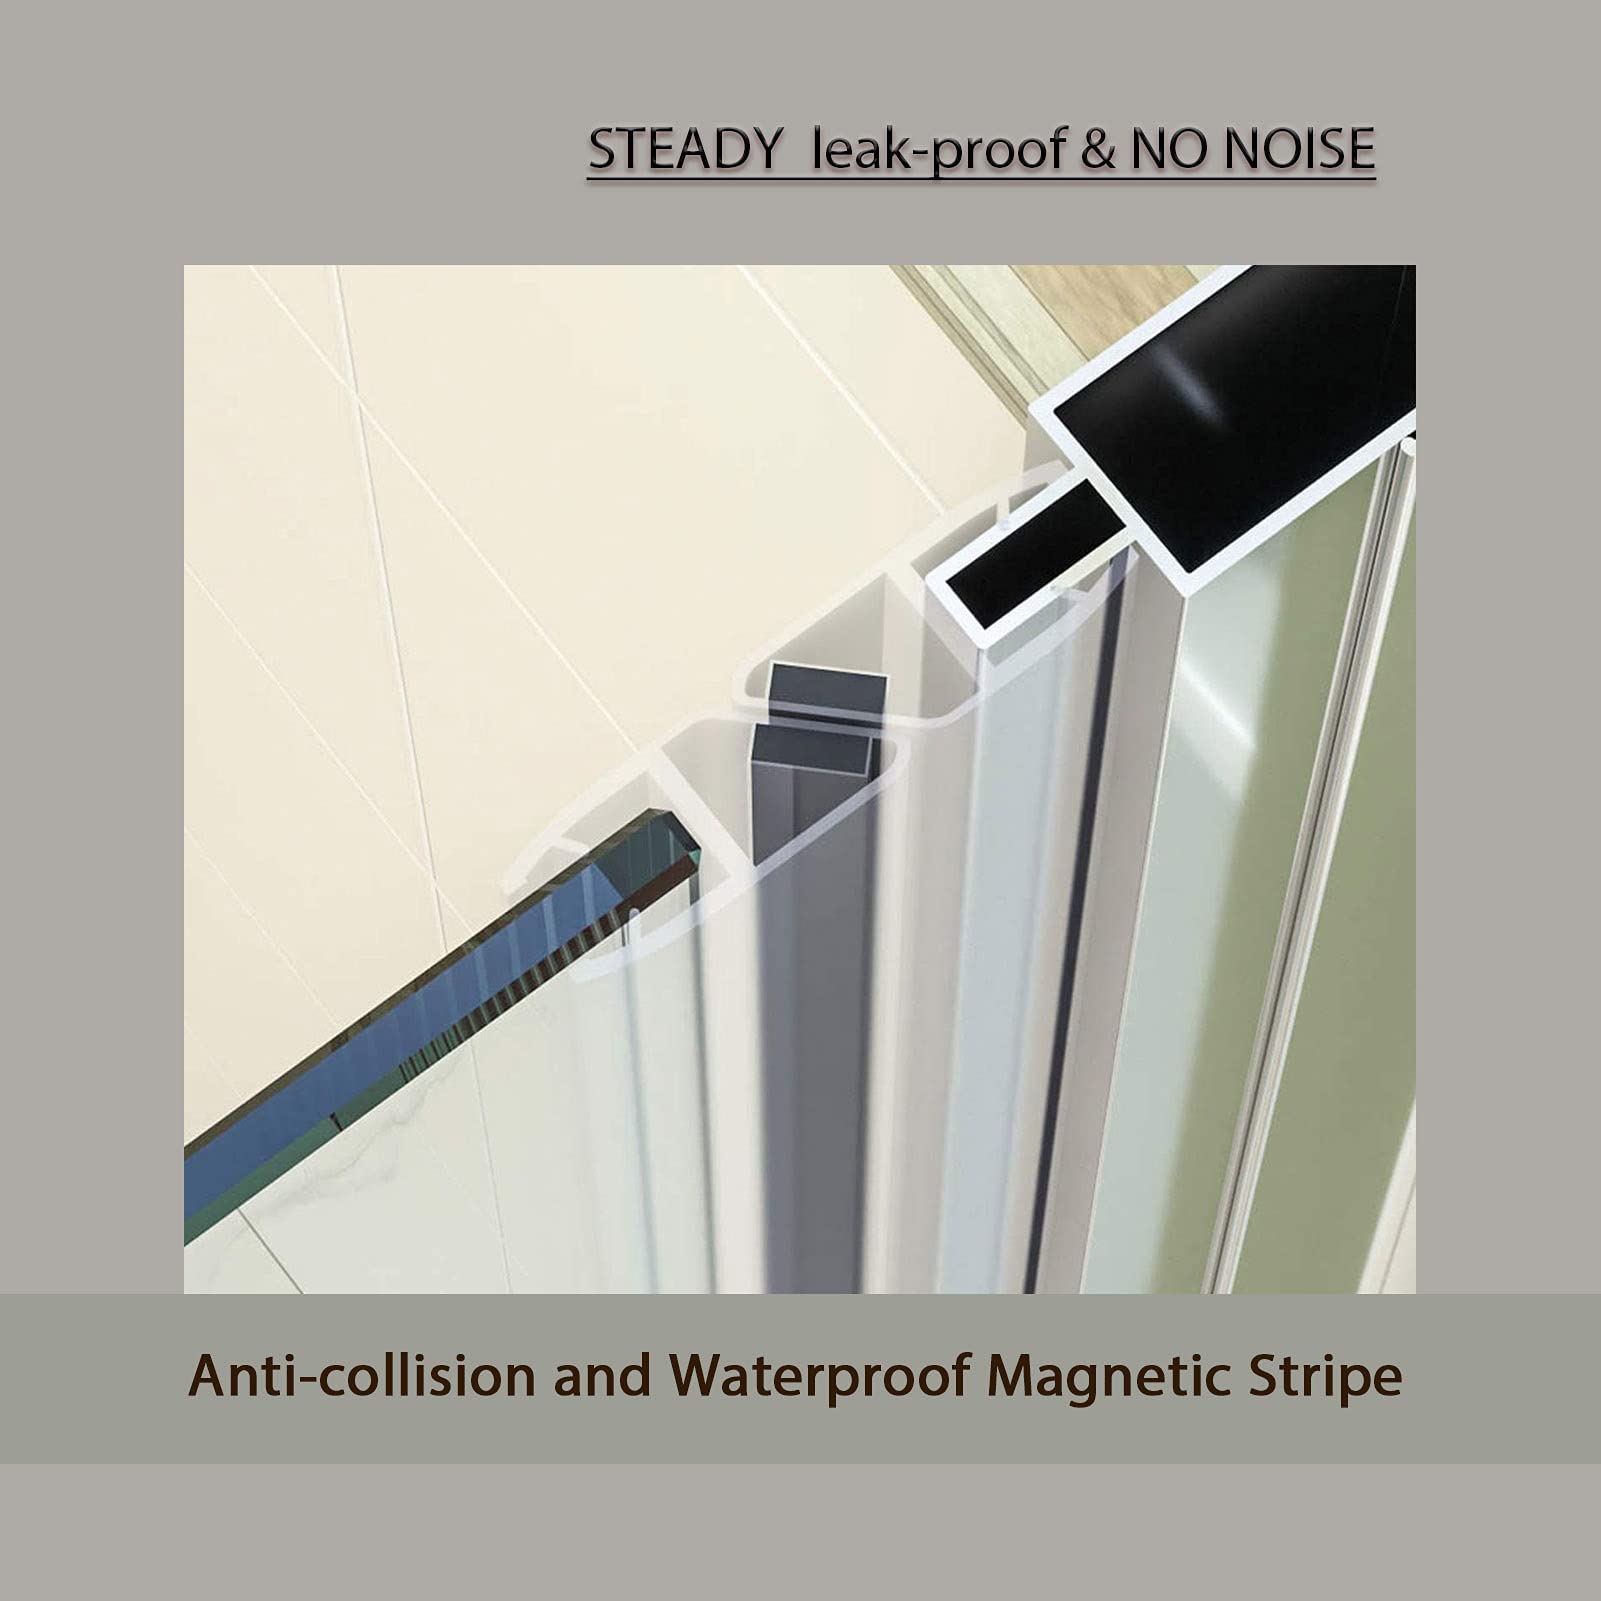 anti-collision and waterproof magnetic stripe